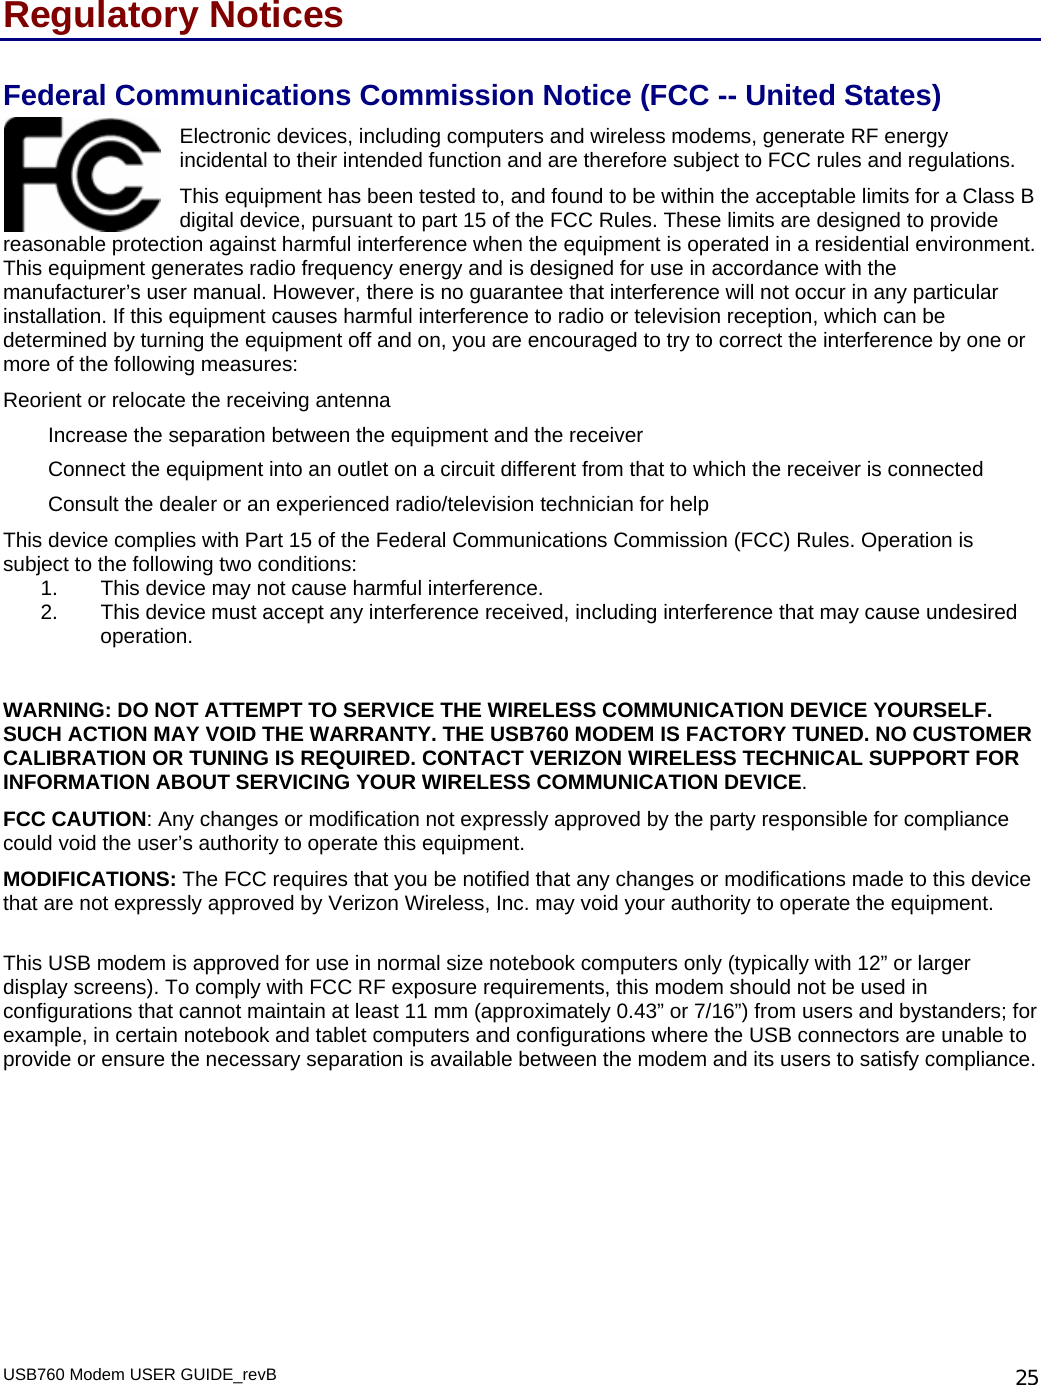 Regulatory Notices Federal Communications Commission Notice (FCC -- United States) USB760 Modem USER GUIDE_revB   25Electronic devices, including computers and wireless modems, generate RF energy incidental to their intended function and are therefore subject to FCC rules and regulations.  This equipment has been tested to, and found to be within the acceptable limits for a Class B digital device, pursuant to part 15 of the FCC Rules. These limits are designed to provide ion against harmful interference when the equipment is operated in a residential environmThis equipment generates radio frequency energy and is designed for use in accordance with the manufacturer’s user manual. However, there is no guarantee that interference will not occur in any particular installation. If this equipment causes harmful interference to radio or television reception, which can be determined by turning the equipment off and on, you are encouraged to try to correct the interference by one or more of the following measures:  reasonable protect ent. Reorient or relocate the receiving antenna  Increase the separation between the equipment and the receiver  Connect the equipment into an outlet on a circuit different from that to which the receiver is connected Consult the dealer or an experienced radio/television technician for help This device complies with Part 15 of the Federal Communications Commission (FCC) Rules. Operation is subject to the following two conditions: 1.  This device may not cause harmful interference.  2.  This device must accept any interference received, including interference that may cause undesired operation.    WARNING: DO NOT ATTEMPT TO SERVICE THE WIRELESS COMMUNICATION DEVICE YOURSELF. SUCH ACTION MAY VOID THE WARRANTY. THE USB760 MODEM IS FACTORY TUNED. NO CUSTOMER CALIBRATION OR TUNING IS REQUIRED. CONTACT VERIZON WIRELESS TECHNICAL SUPPORT FOR INFORMATION ABOUT SERVICING YOUR WIRELESS COMMUNICATION DEVICE. FCC CAUTION: Any changes or modification not expressly approved by the party responsible for compliance could void the user’s authority to operate this equipment.  MODIFICATIONS: The FCC requires that you be notified that any changes or modifications made to this device that are not expressly approved by Verizon Wireless, Inc. may void your authority to operate the equipment.  This USB modem is approved for use in normal size notebook computers only (typically with 12” or larger display screens). To comply with FCC RF exposure requirements, this modem should not be used in configurations that cannot maintain at least 11 mm (approximately 0.43” or 7/16”) from users and bystanders; for example, in certain notebook and tablet computers and configurations where the USB connectors are unable to provide or ensure the necessary separation is available between the modem and its users to satisfy compliance.        